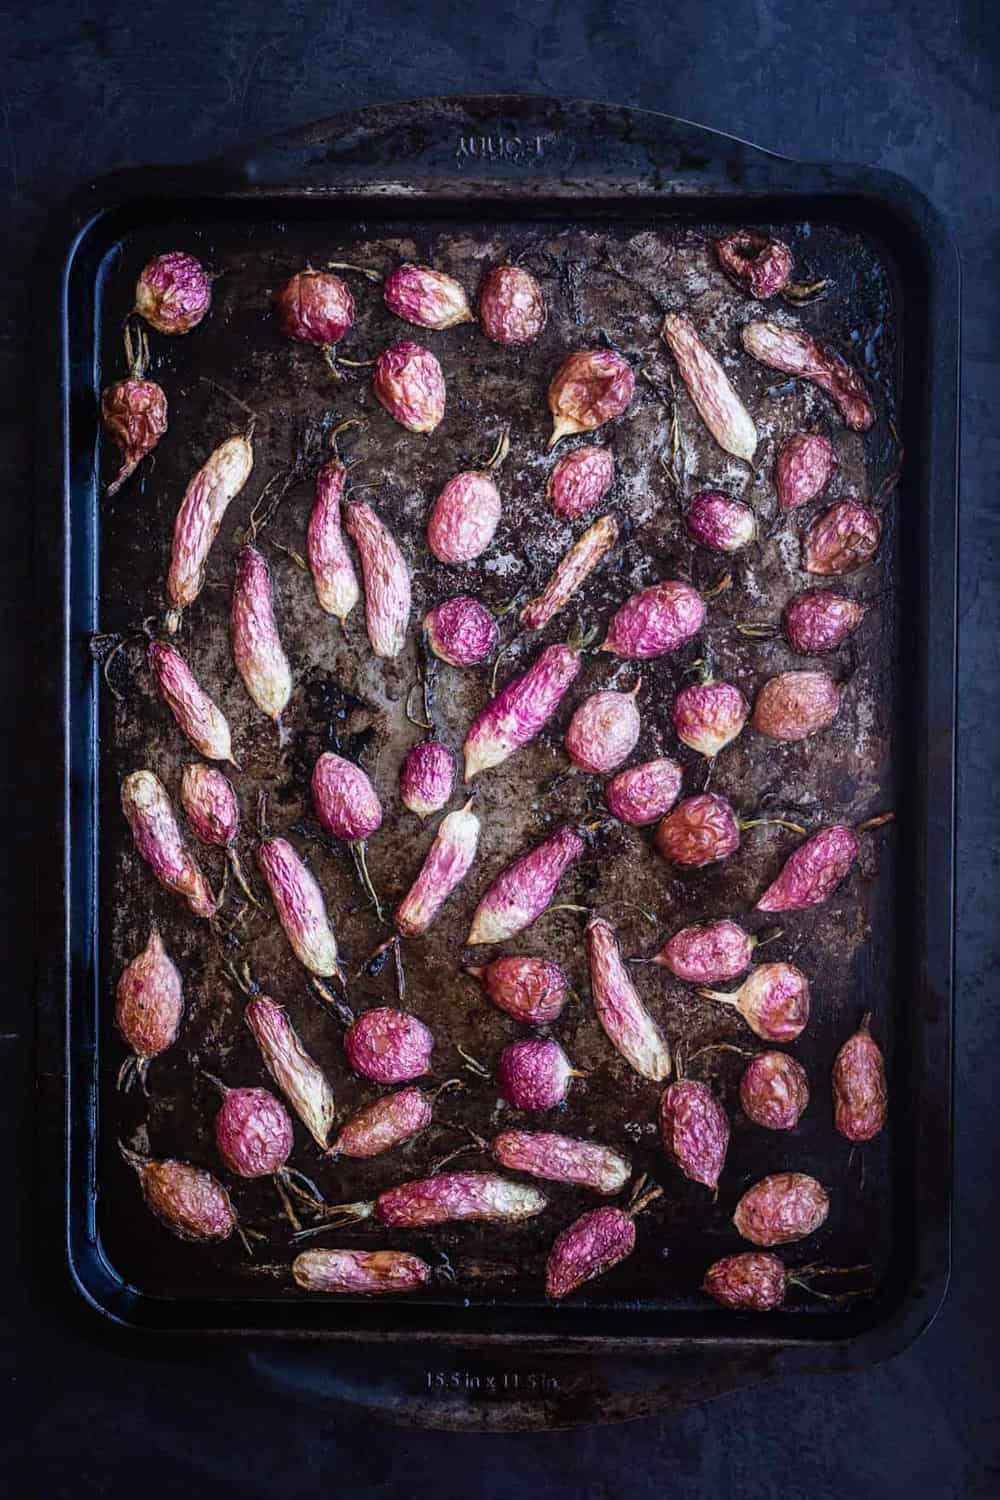 Roasted radishes just out of the oven, on a baking sheet on a black background.